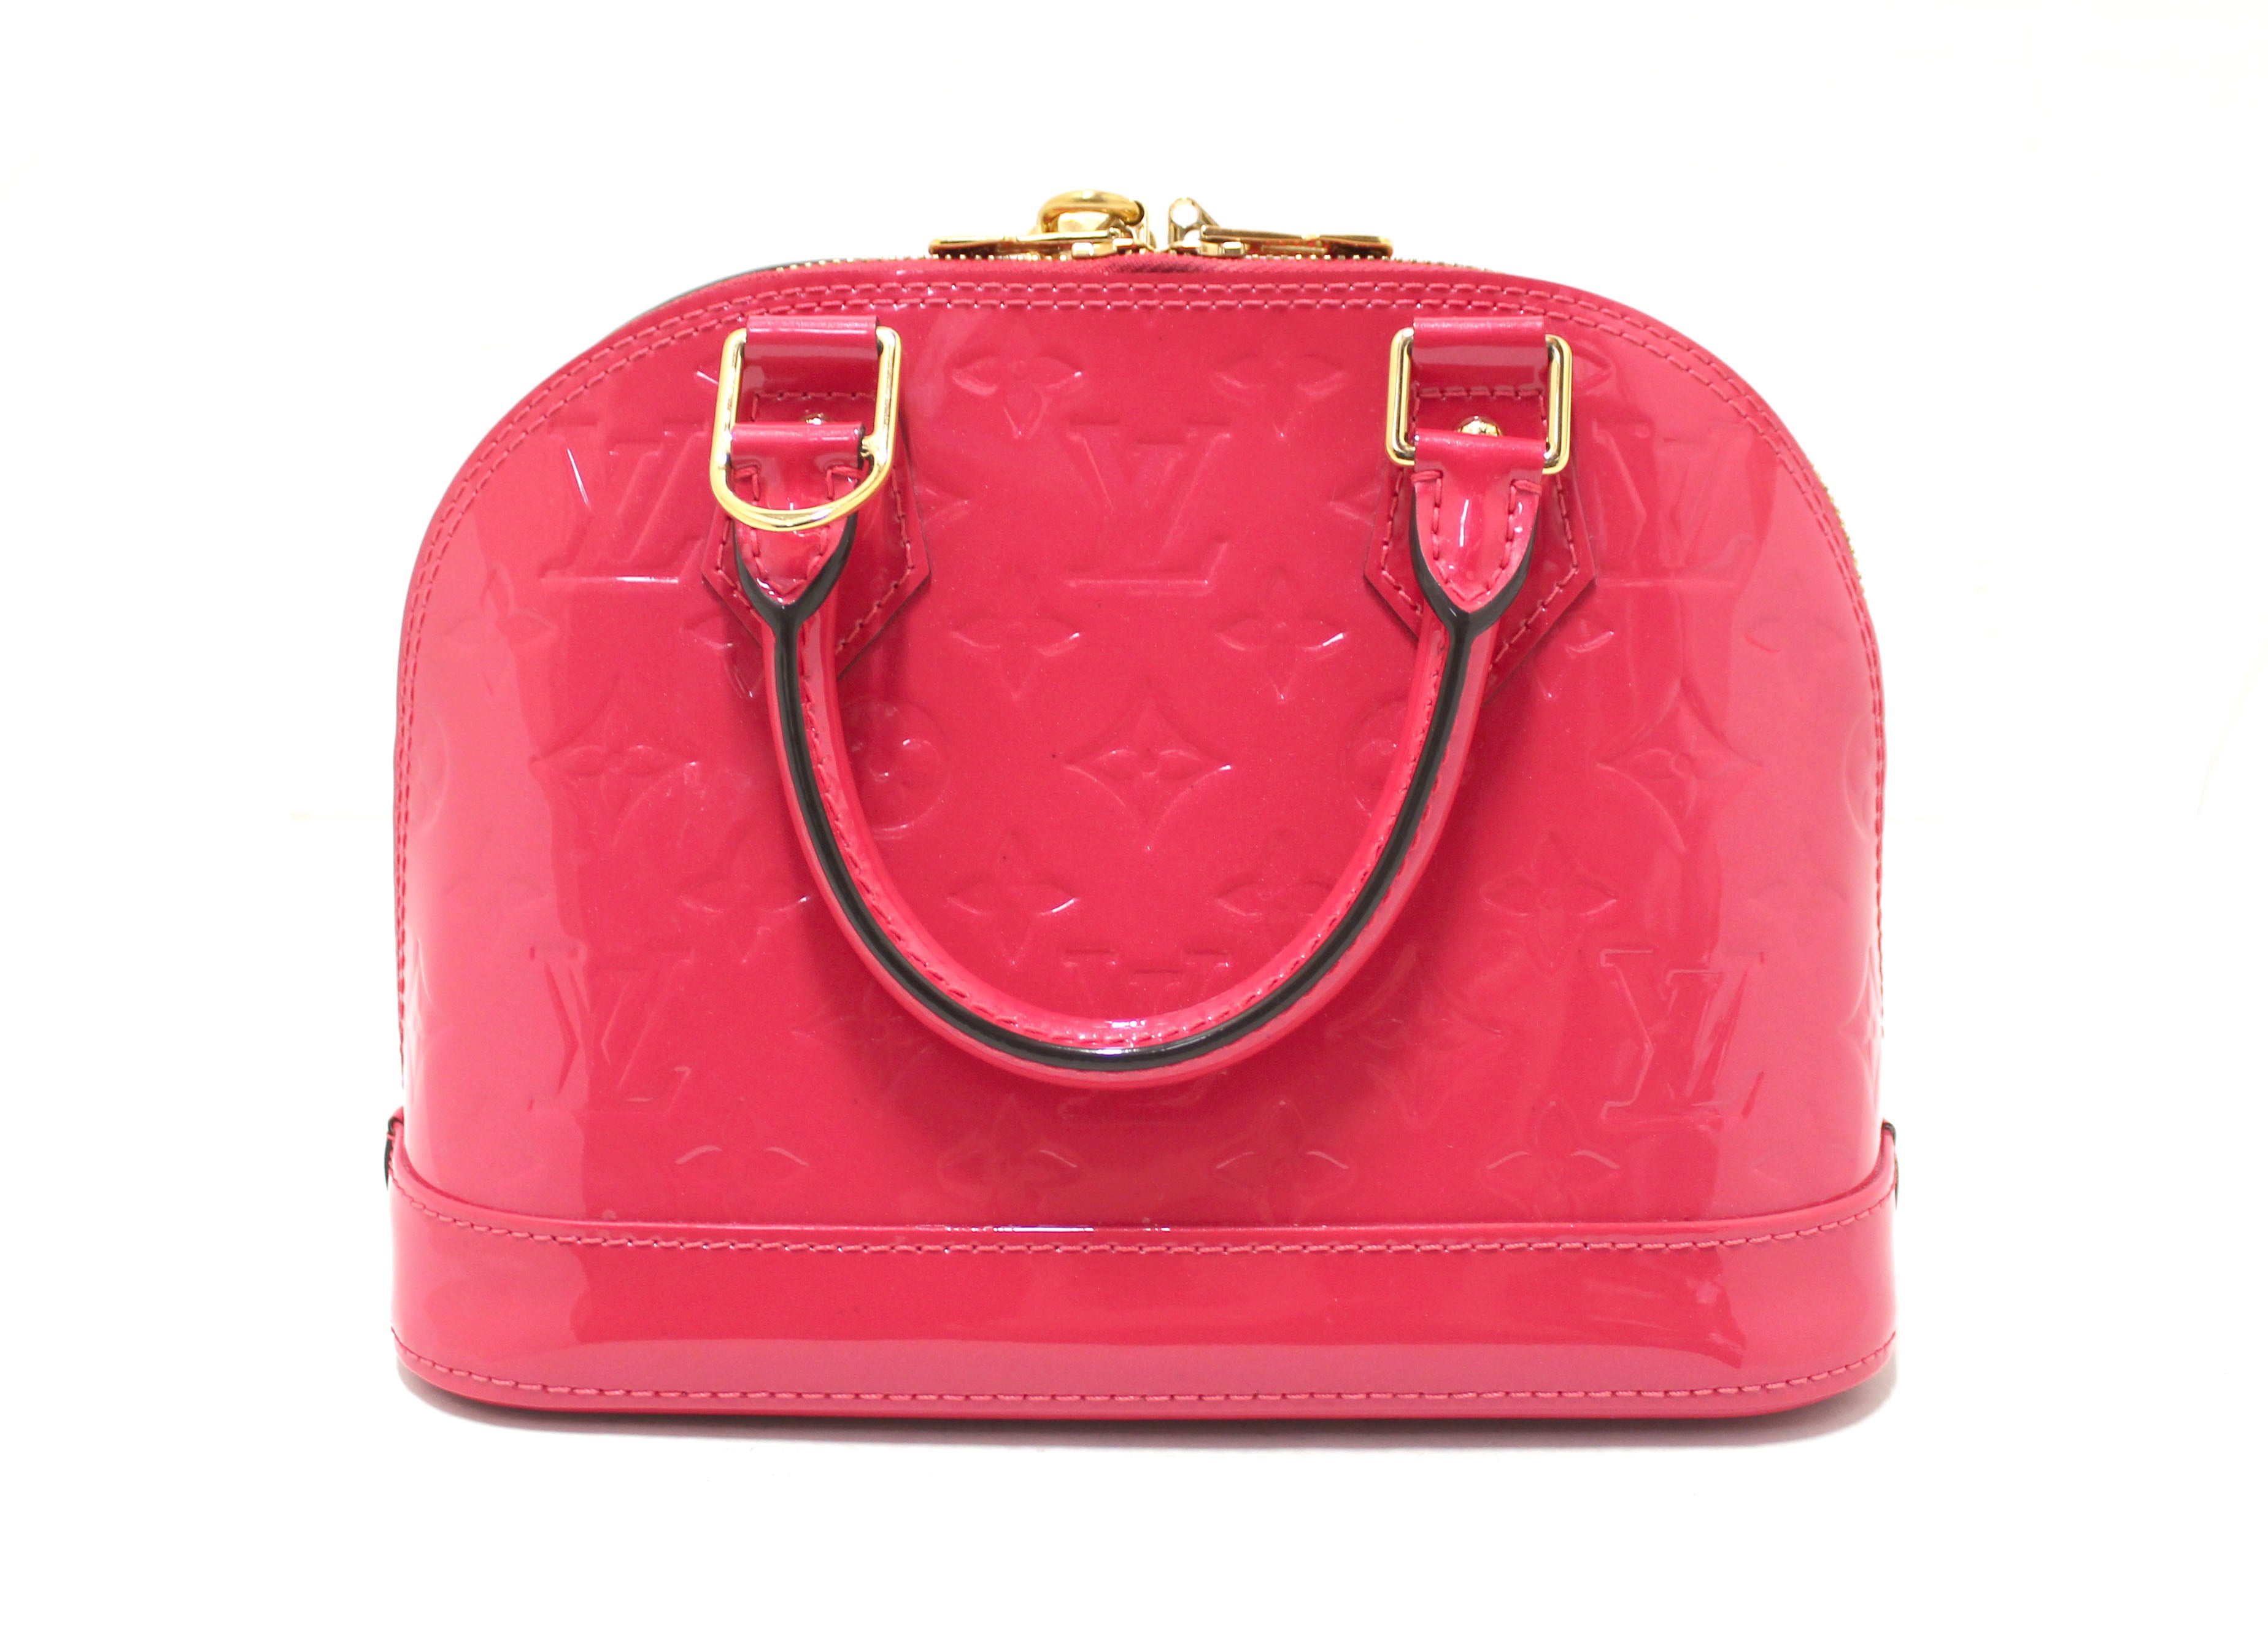 Authentic Louis Vuitton Pink Vernis Leather Alma BB Hand/Crossbody Bag